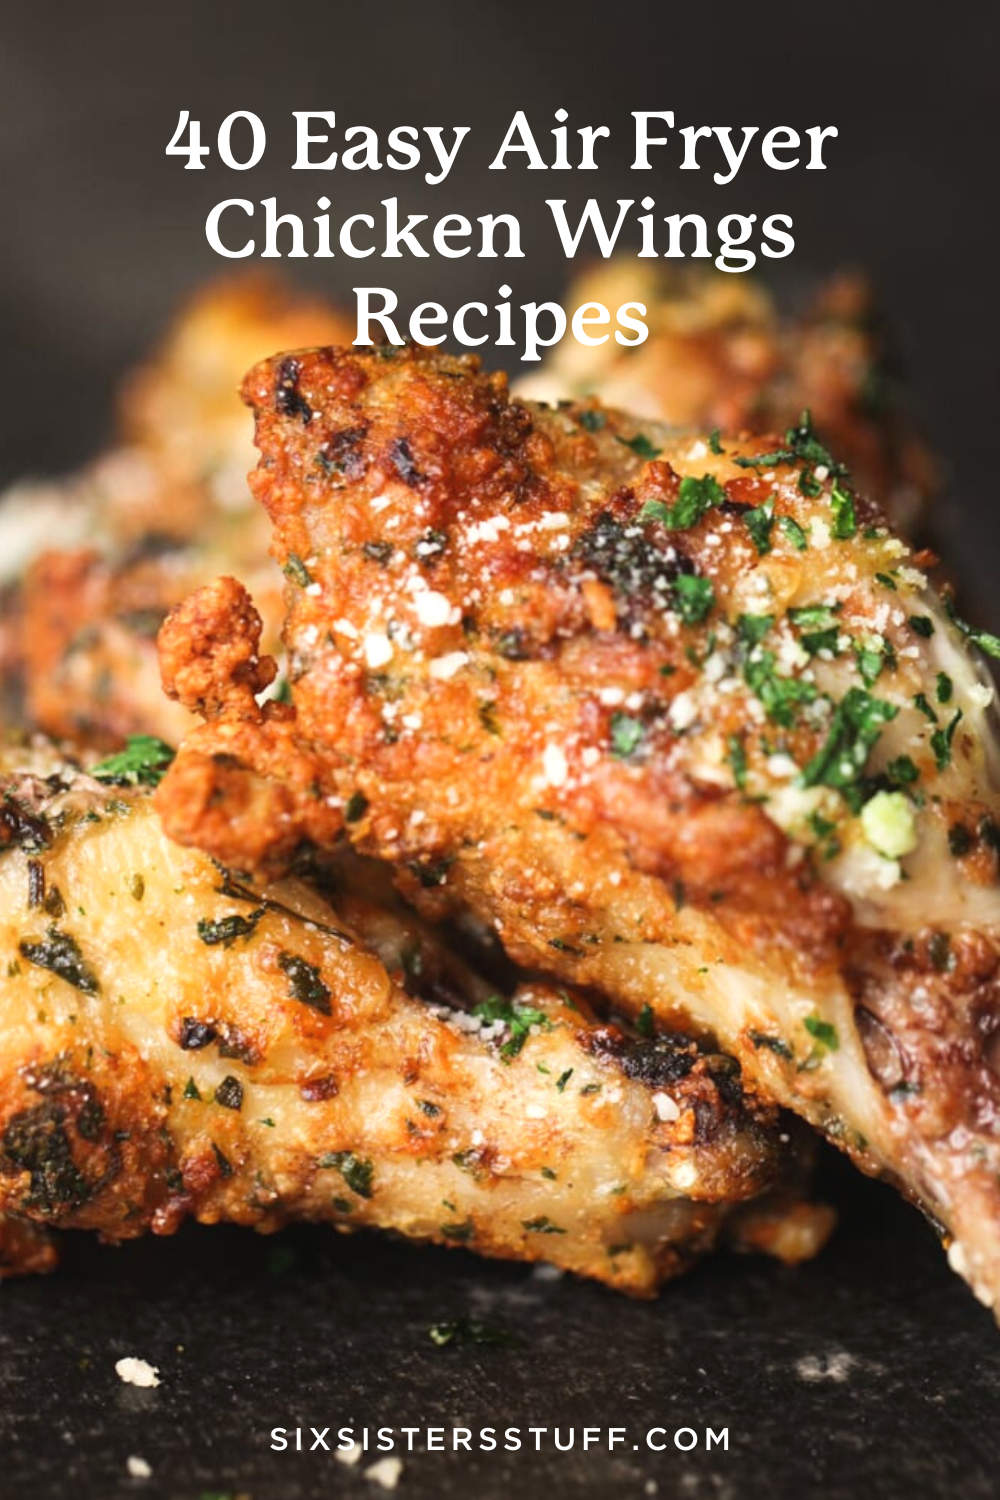 40 Easy Air Fryer Chicken Wings Recipes